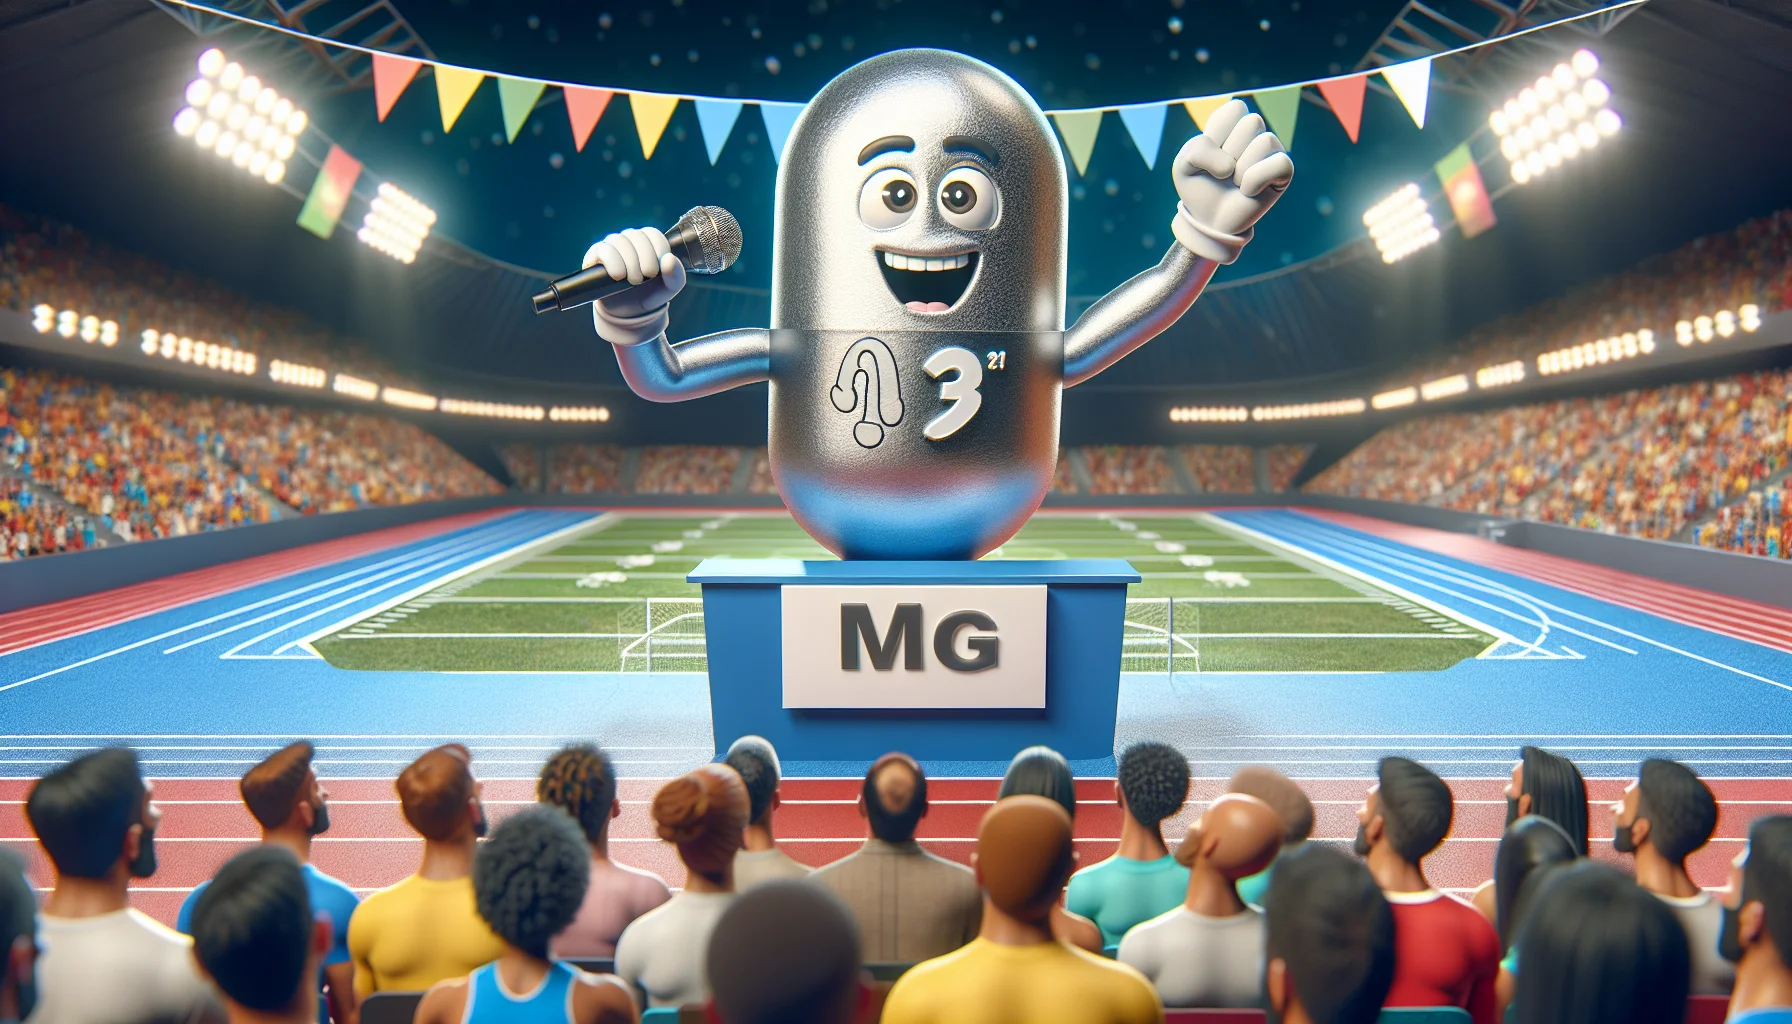 Envision a humorous scenario involving magnesium-7, personified as a charismatic, animated character. This character, having the atomic number and properties of Magnesium-7, is holding a microphone, enthusiastically advertising the benefits of magnesium supplements for sports performance. It is on a stage designed like a sports arena, with strings of colorful banners fluttering above, and an audience of diverse men and women athletes of Caucasian, African, Hispanic, and Asian descents, eagerly listening and reacting to the presentation. Blurred in the backdrop is a magnified image of a magnesium supplement capsule, emphasizing the subject of the presentation.